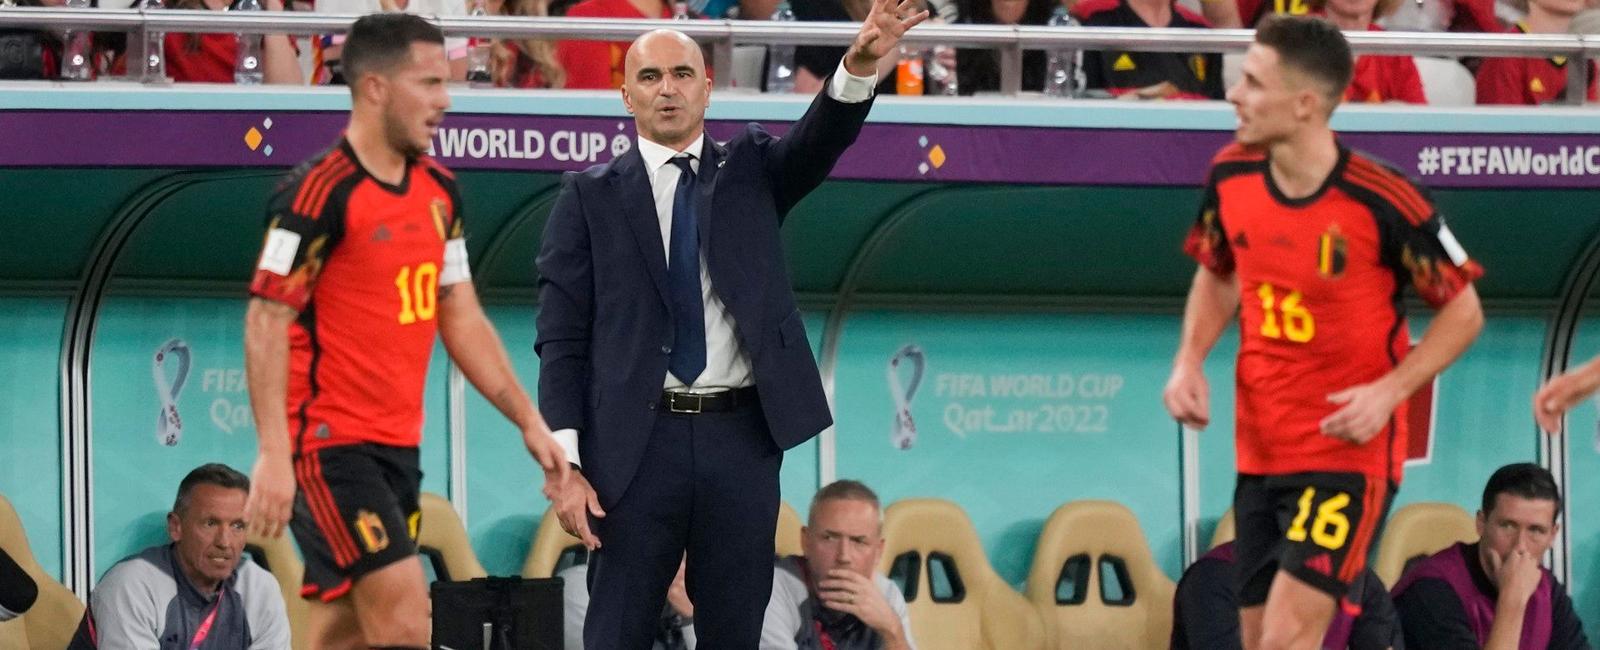 Roberto Martinez left the post of head coach of the Belgian national team